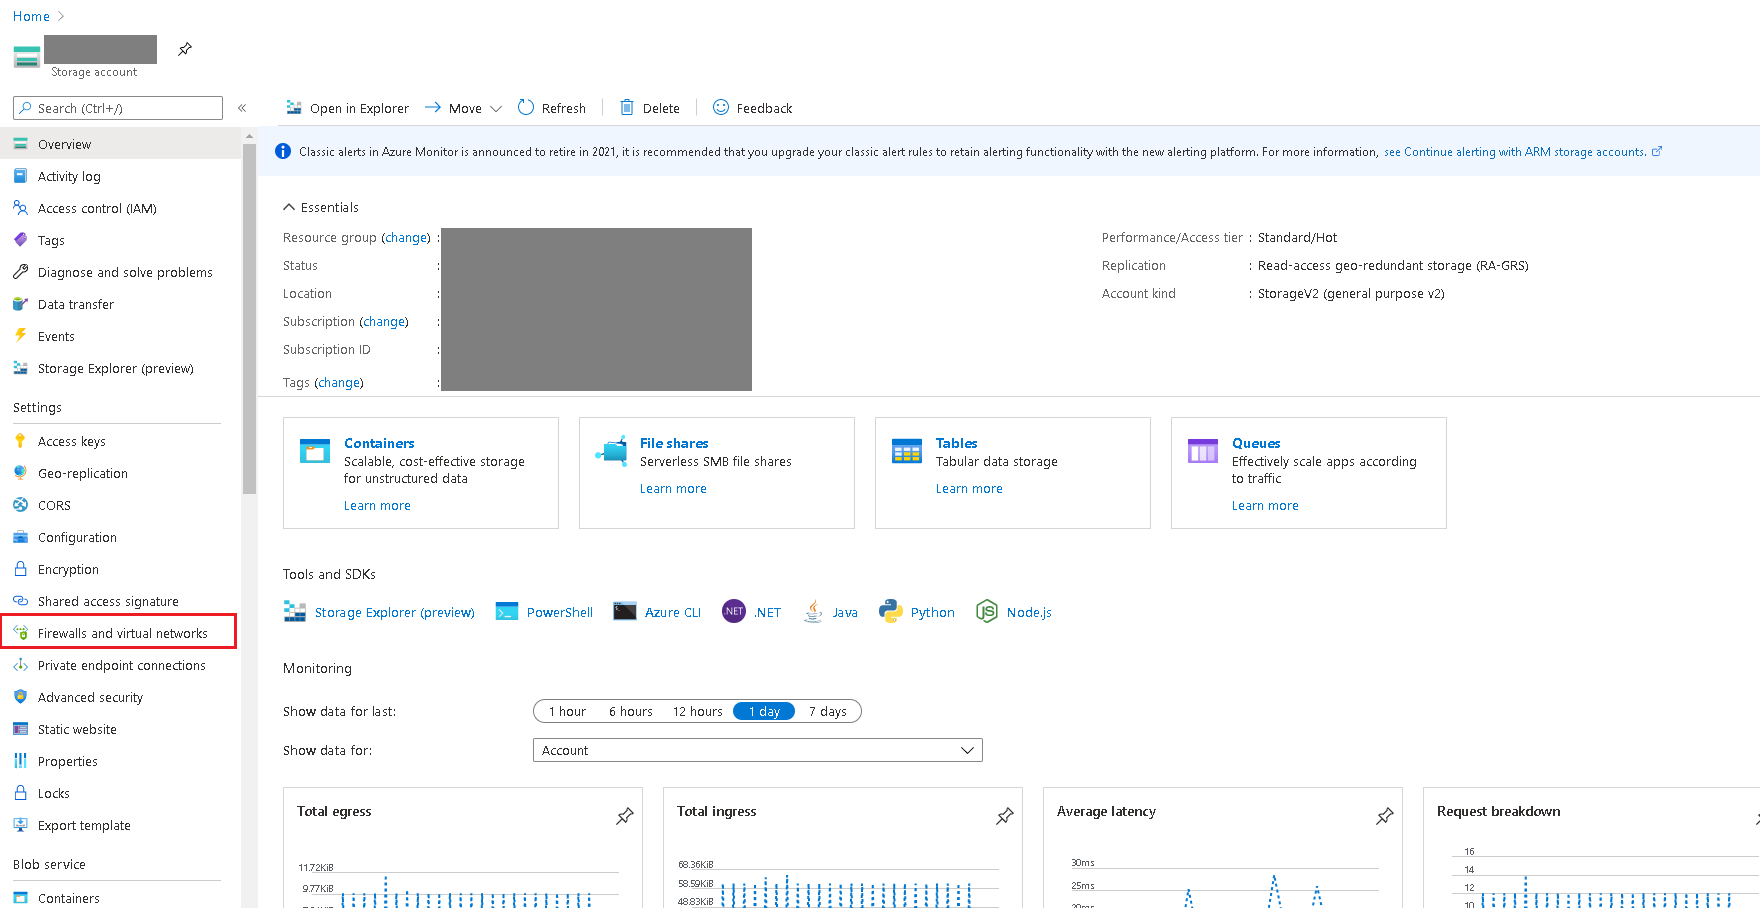 Screenshot of Azure Storage Firewall and virtual networks page